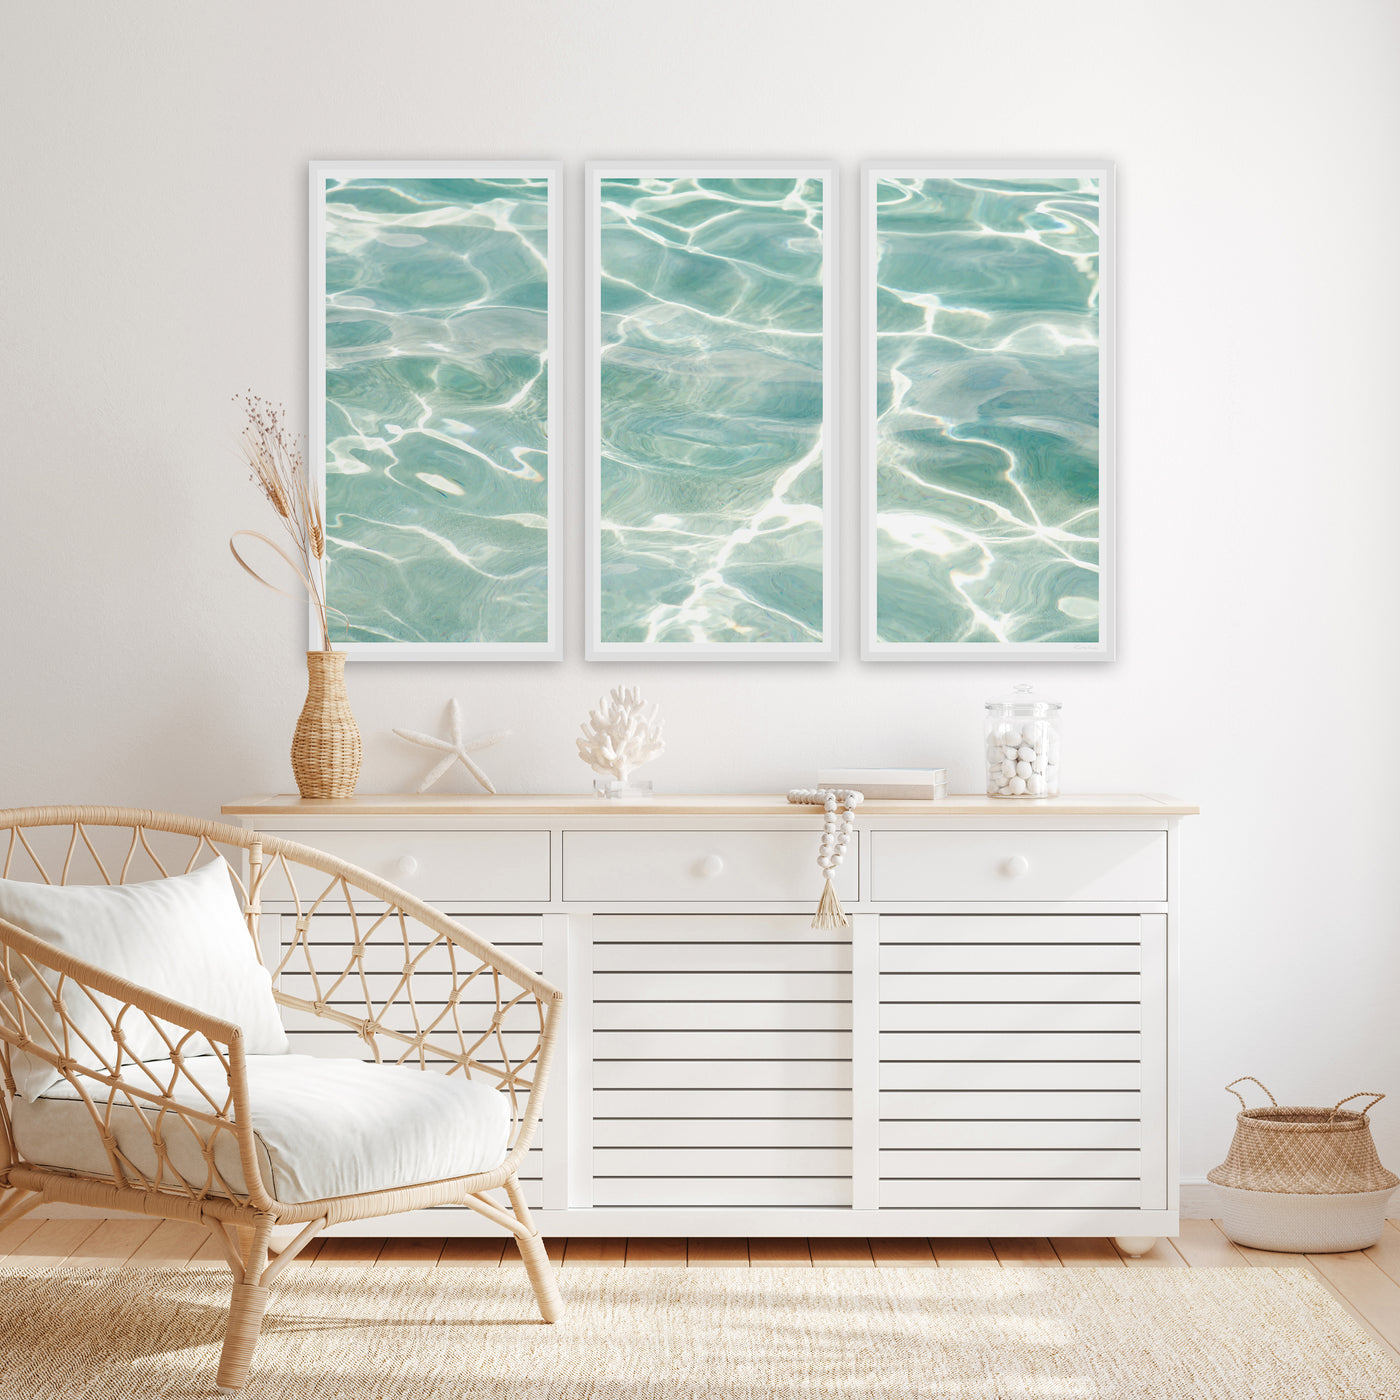 Caribbean Sea No 3 - Multi panel wall art by Cattie Coyle Photography above dresser in beach house